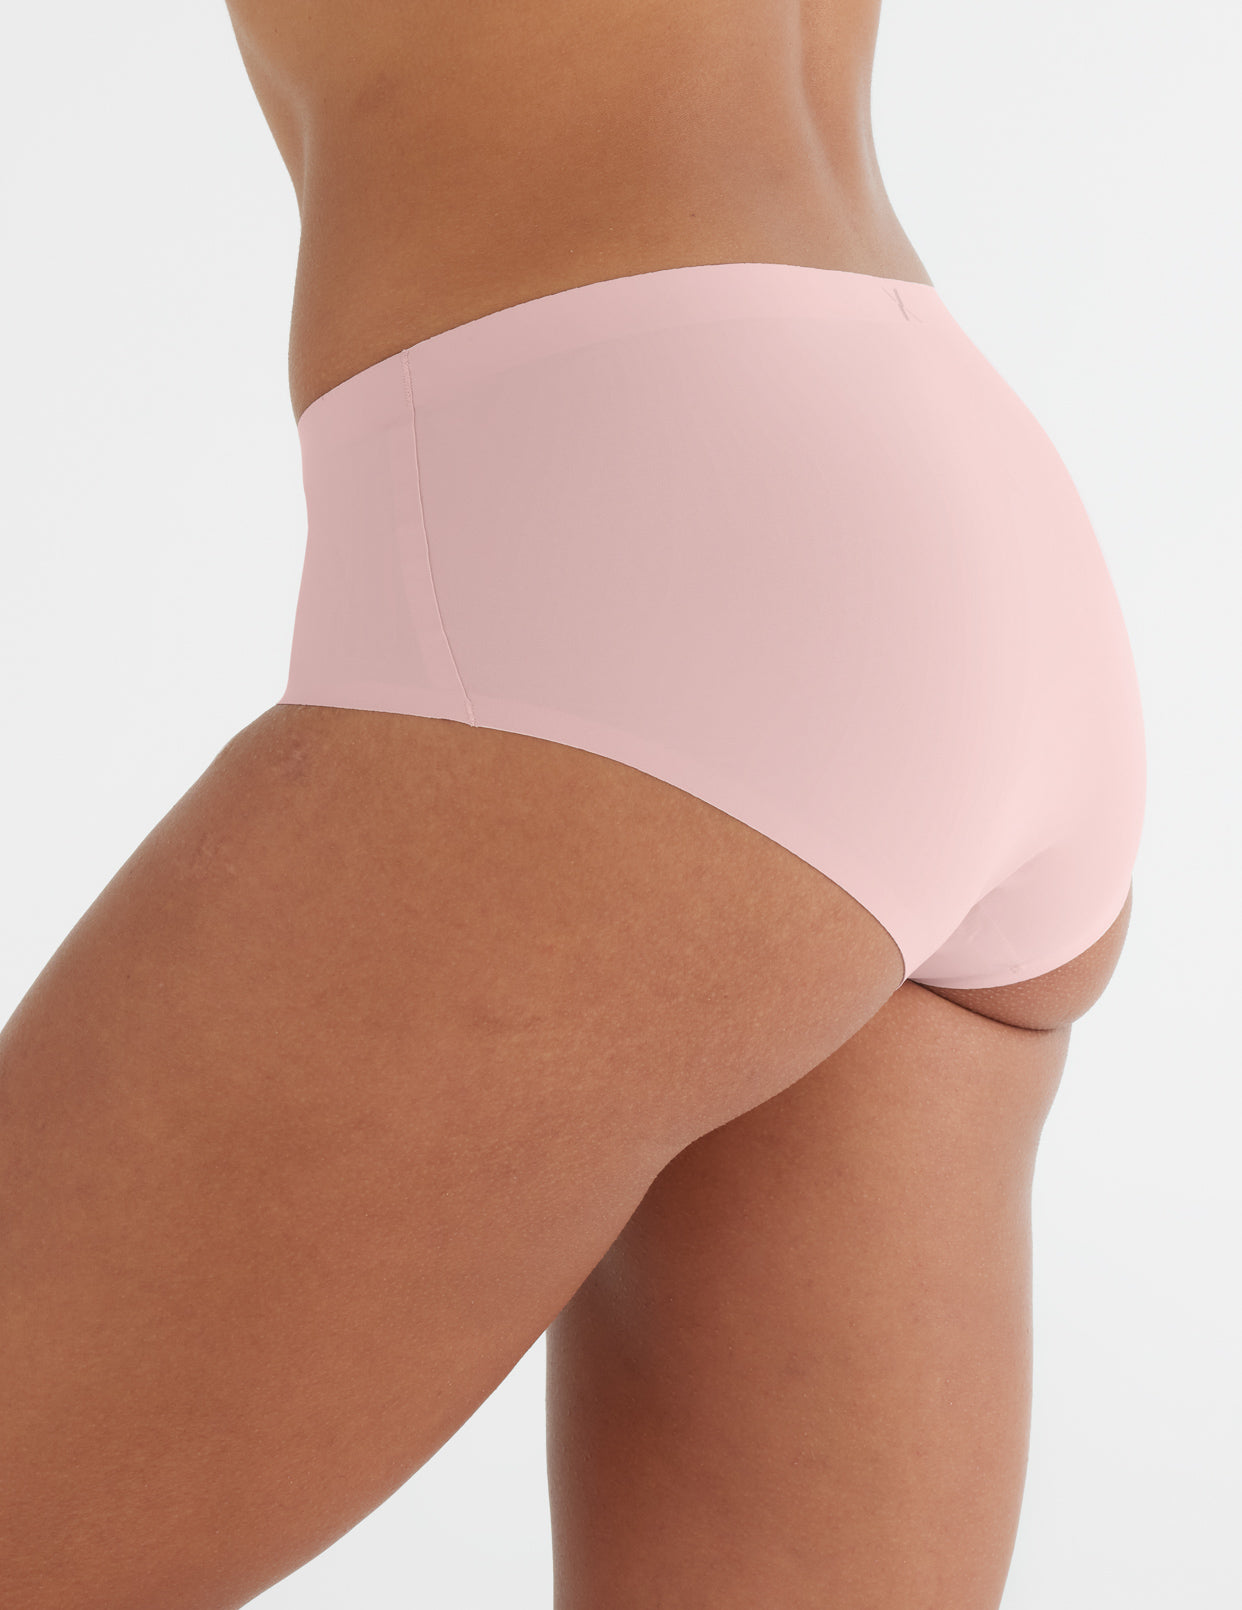 Clip-Knix Women Lace Underwear, Adaptive Cheeky Sexy Button Underwear, Patented and Front Fastening Knicker